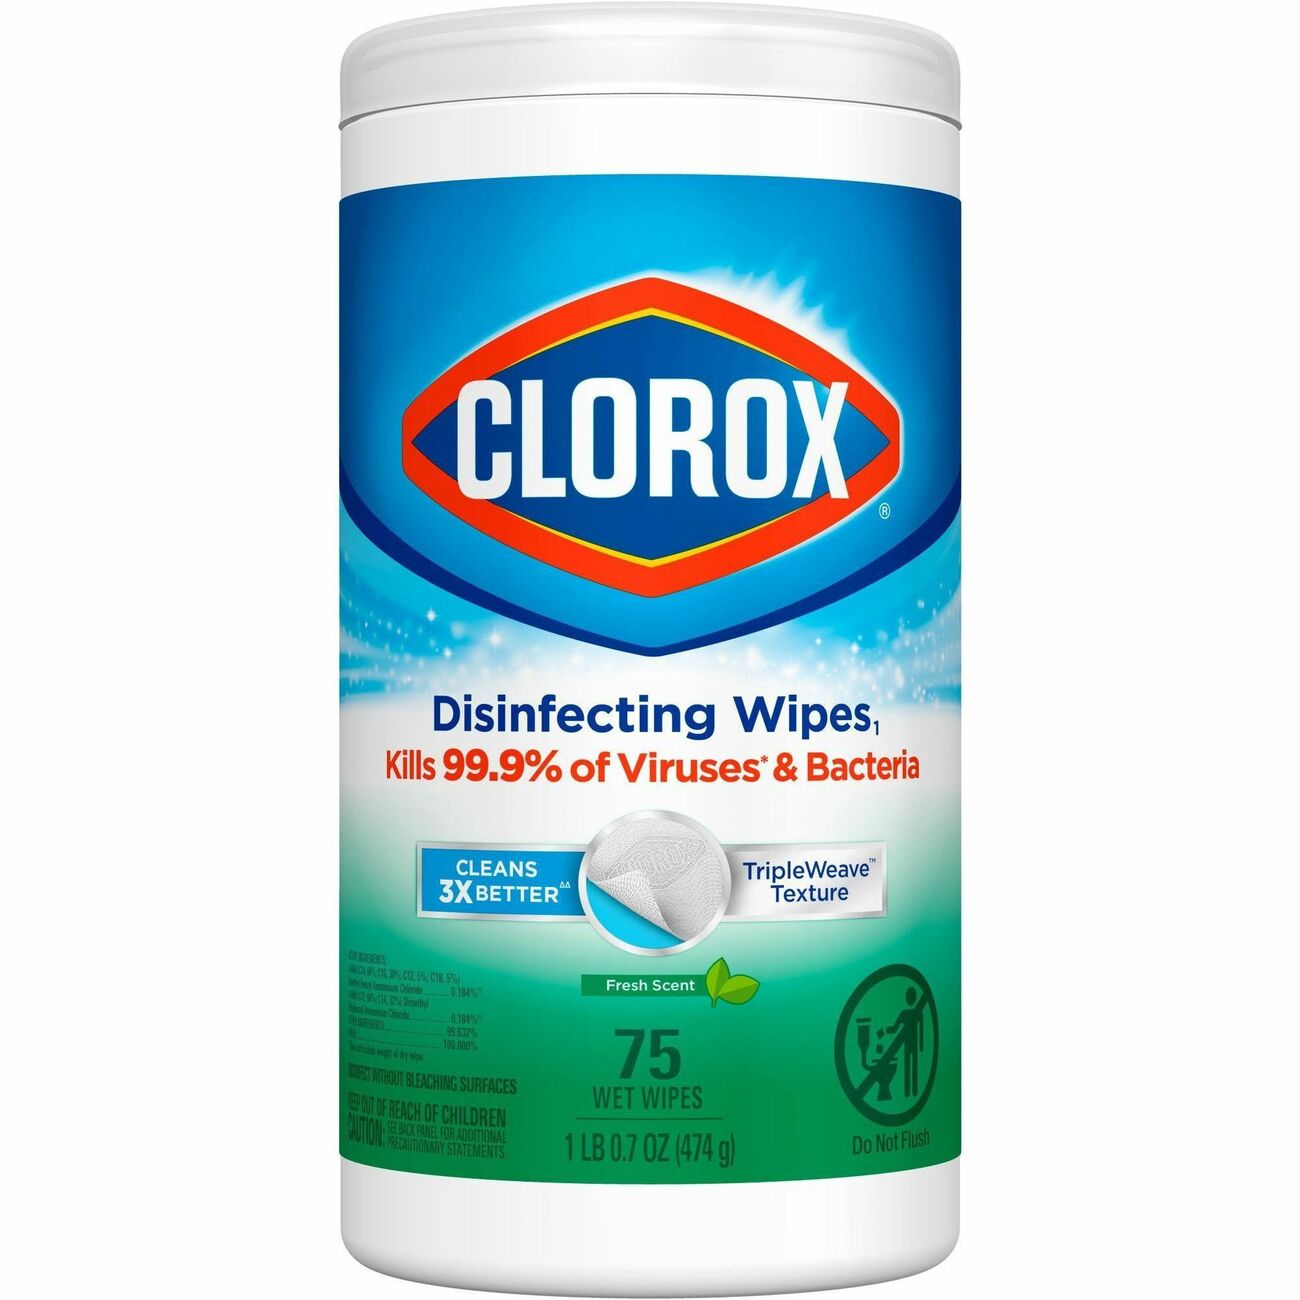 Clorox® Green Works® Cleaning Wipes, Simply Lemon